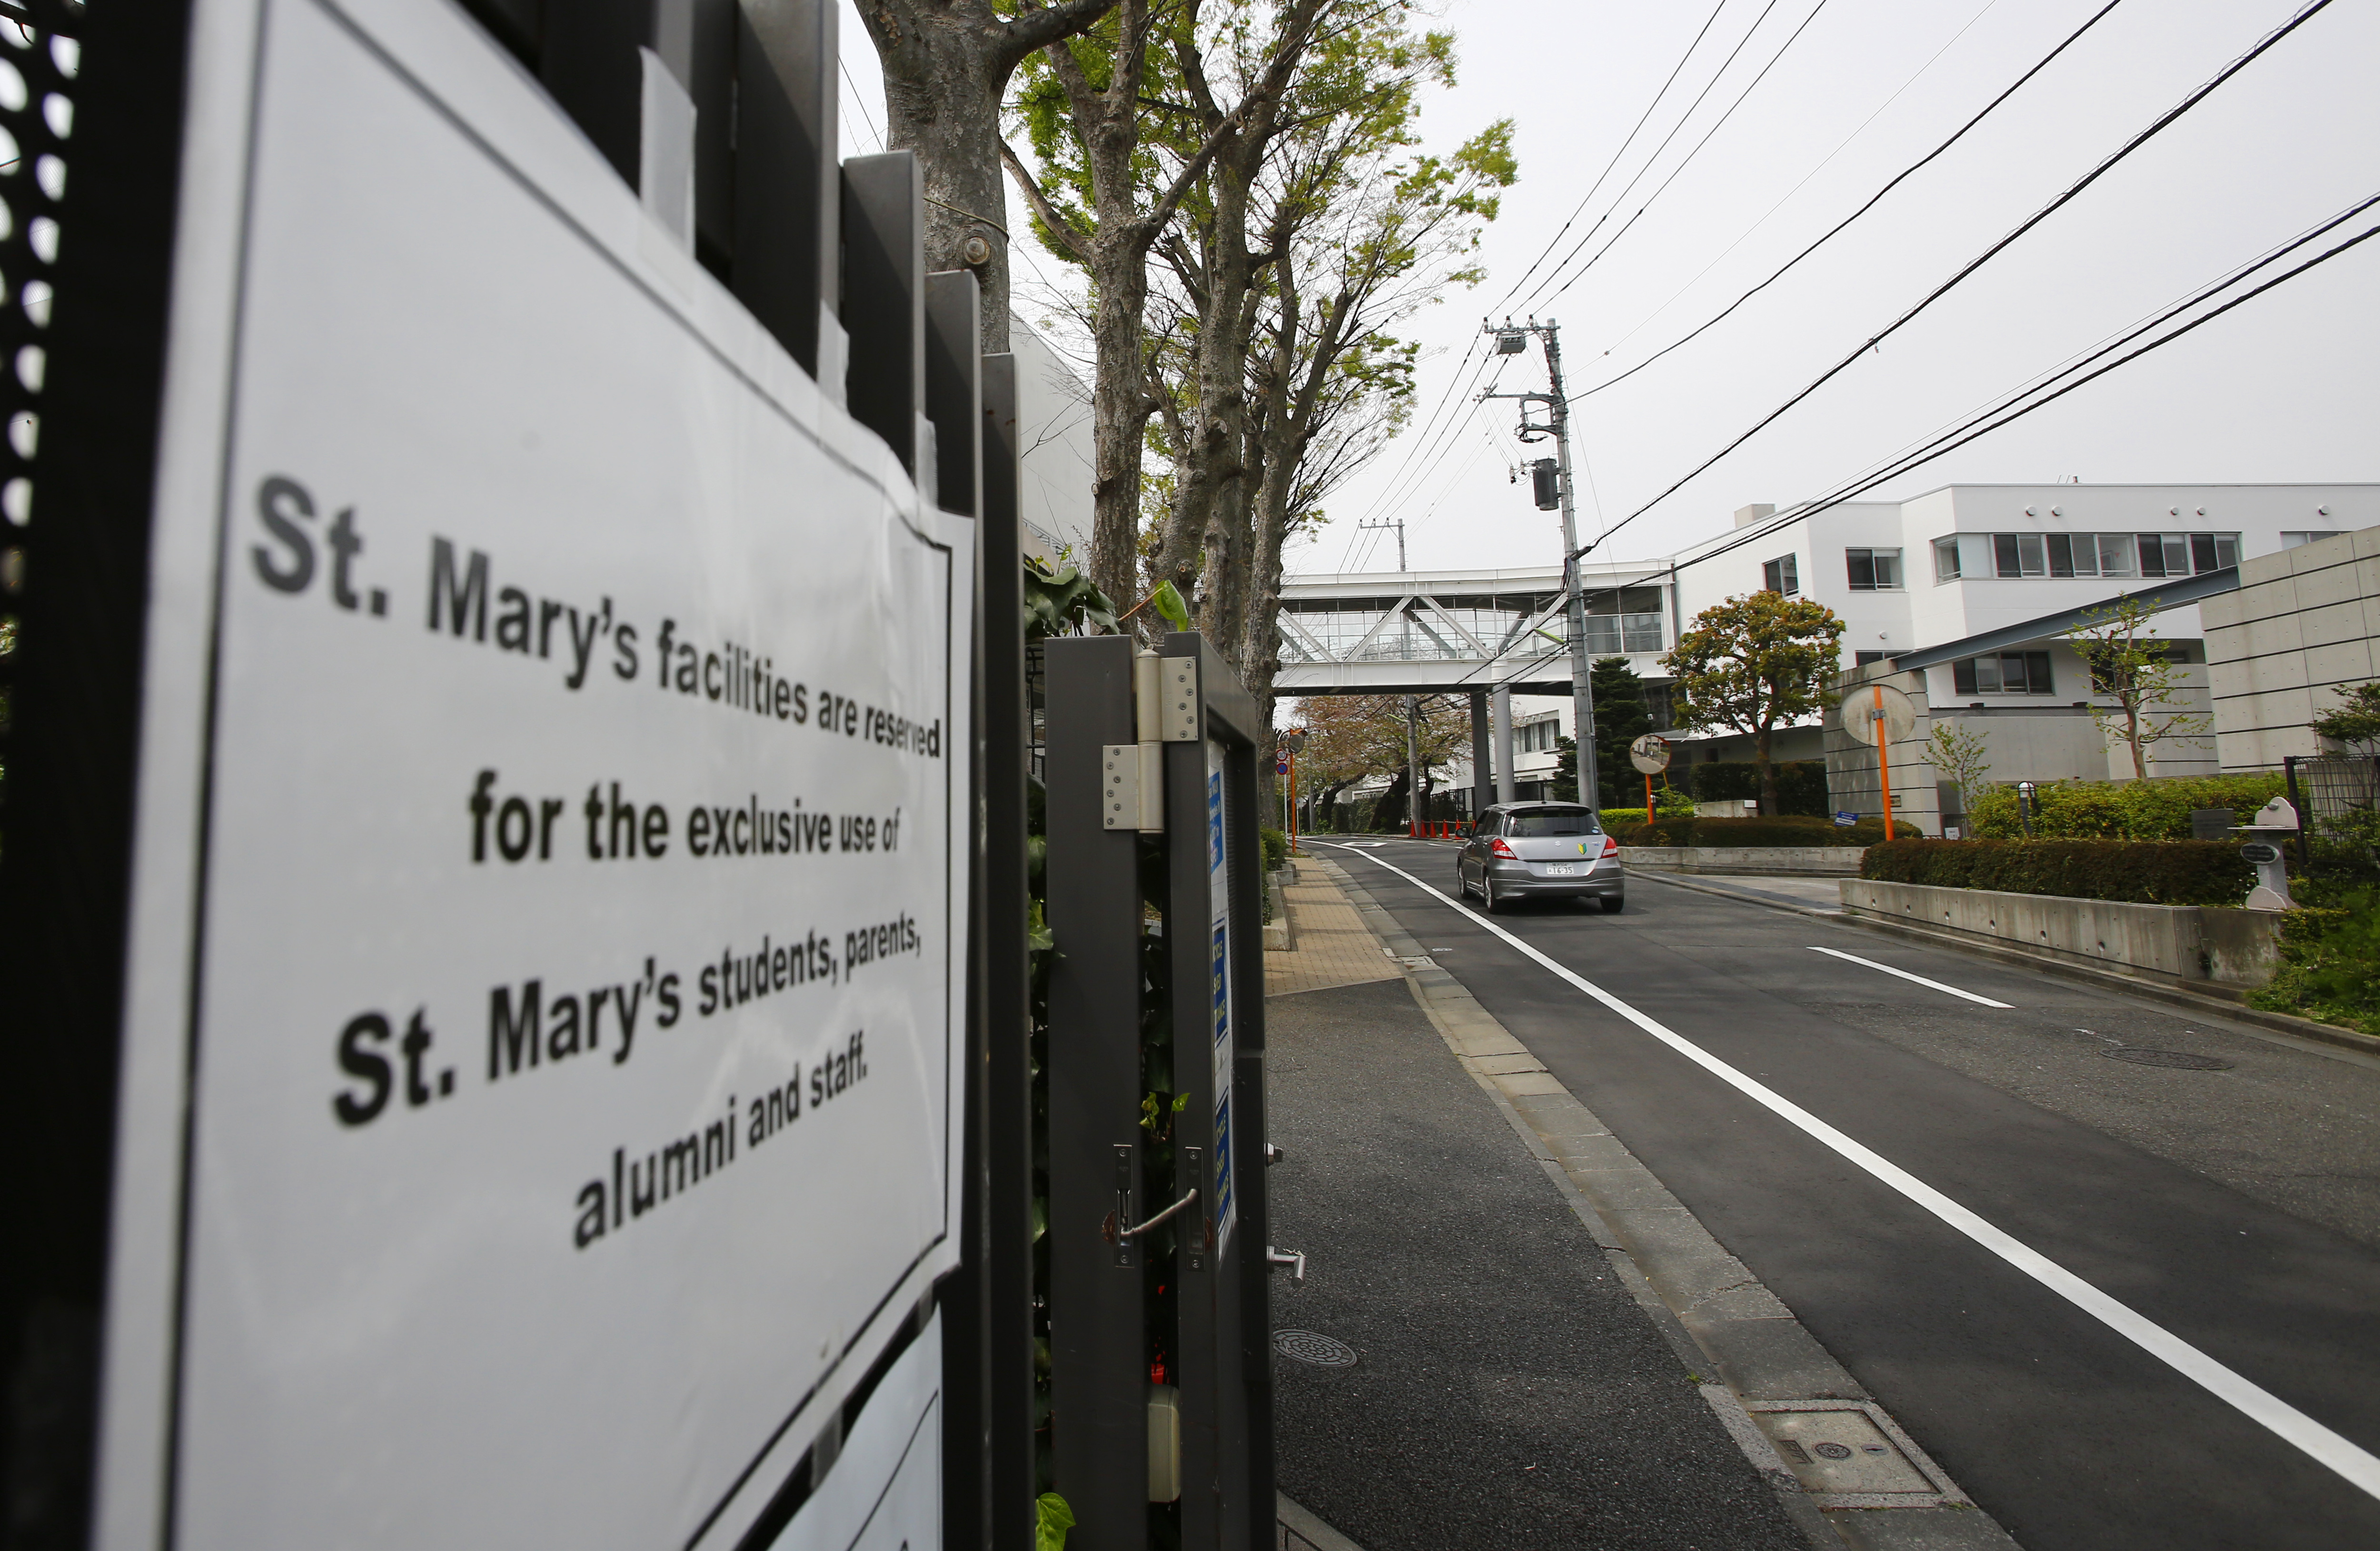 Catholic Church sex abuse scandal hits Japan with allegations by ex-students of St